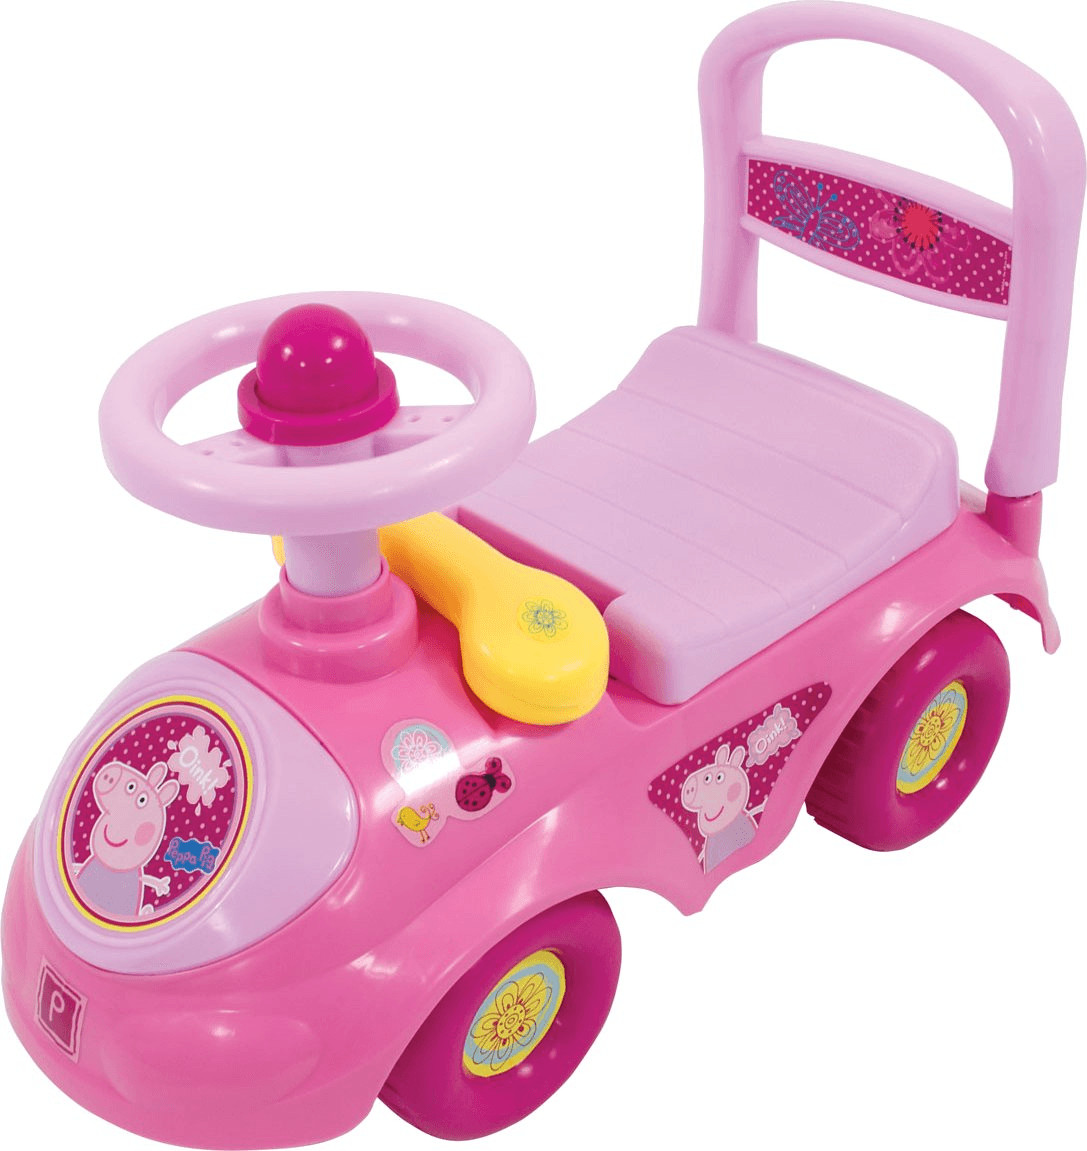 MV Sports Peppa Pig My First Sit and Ride (M07108)